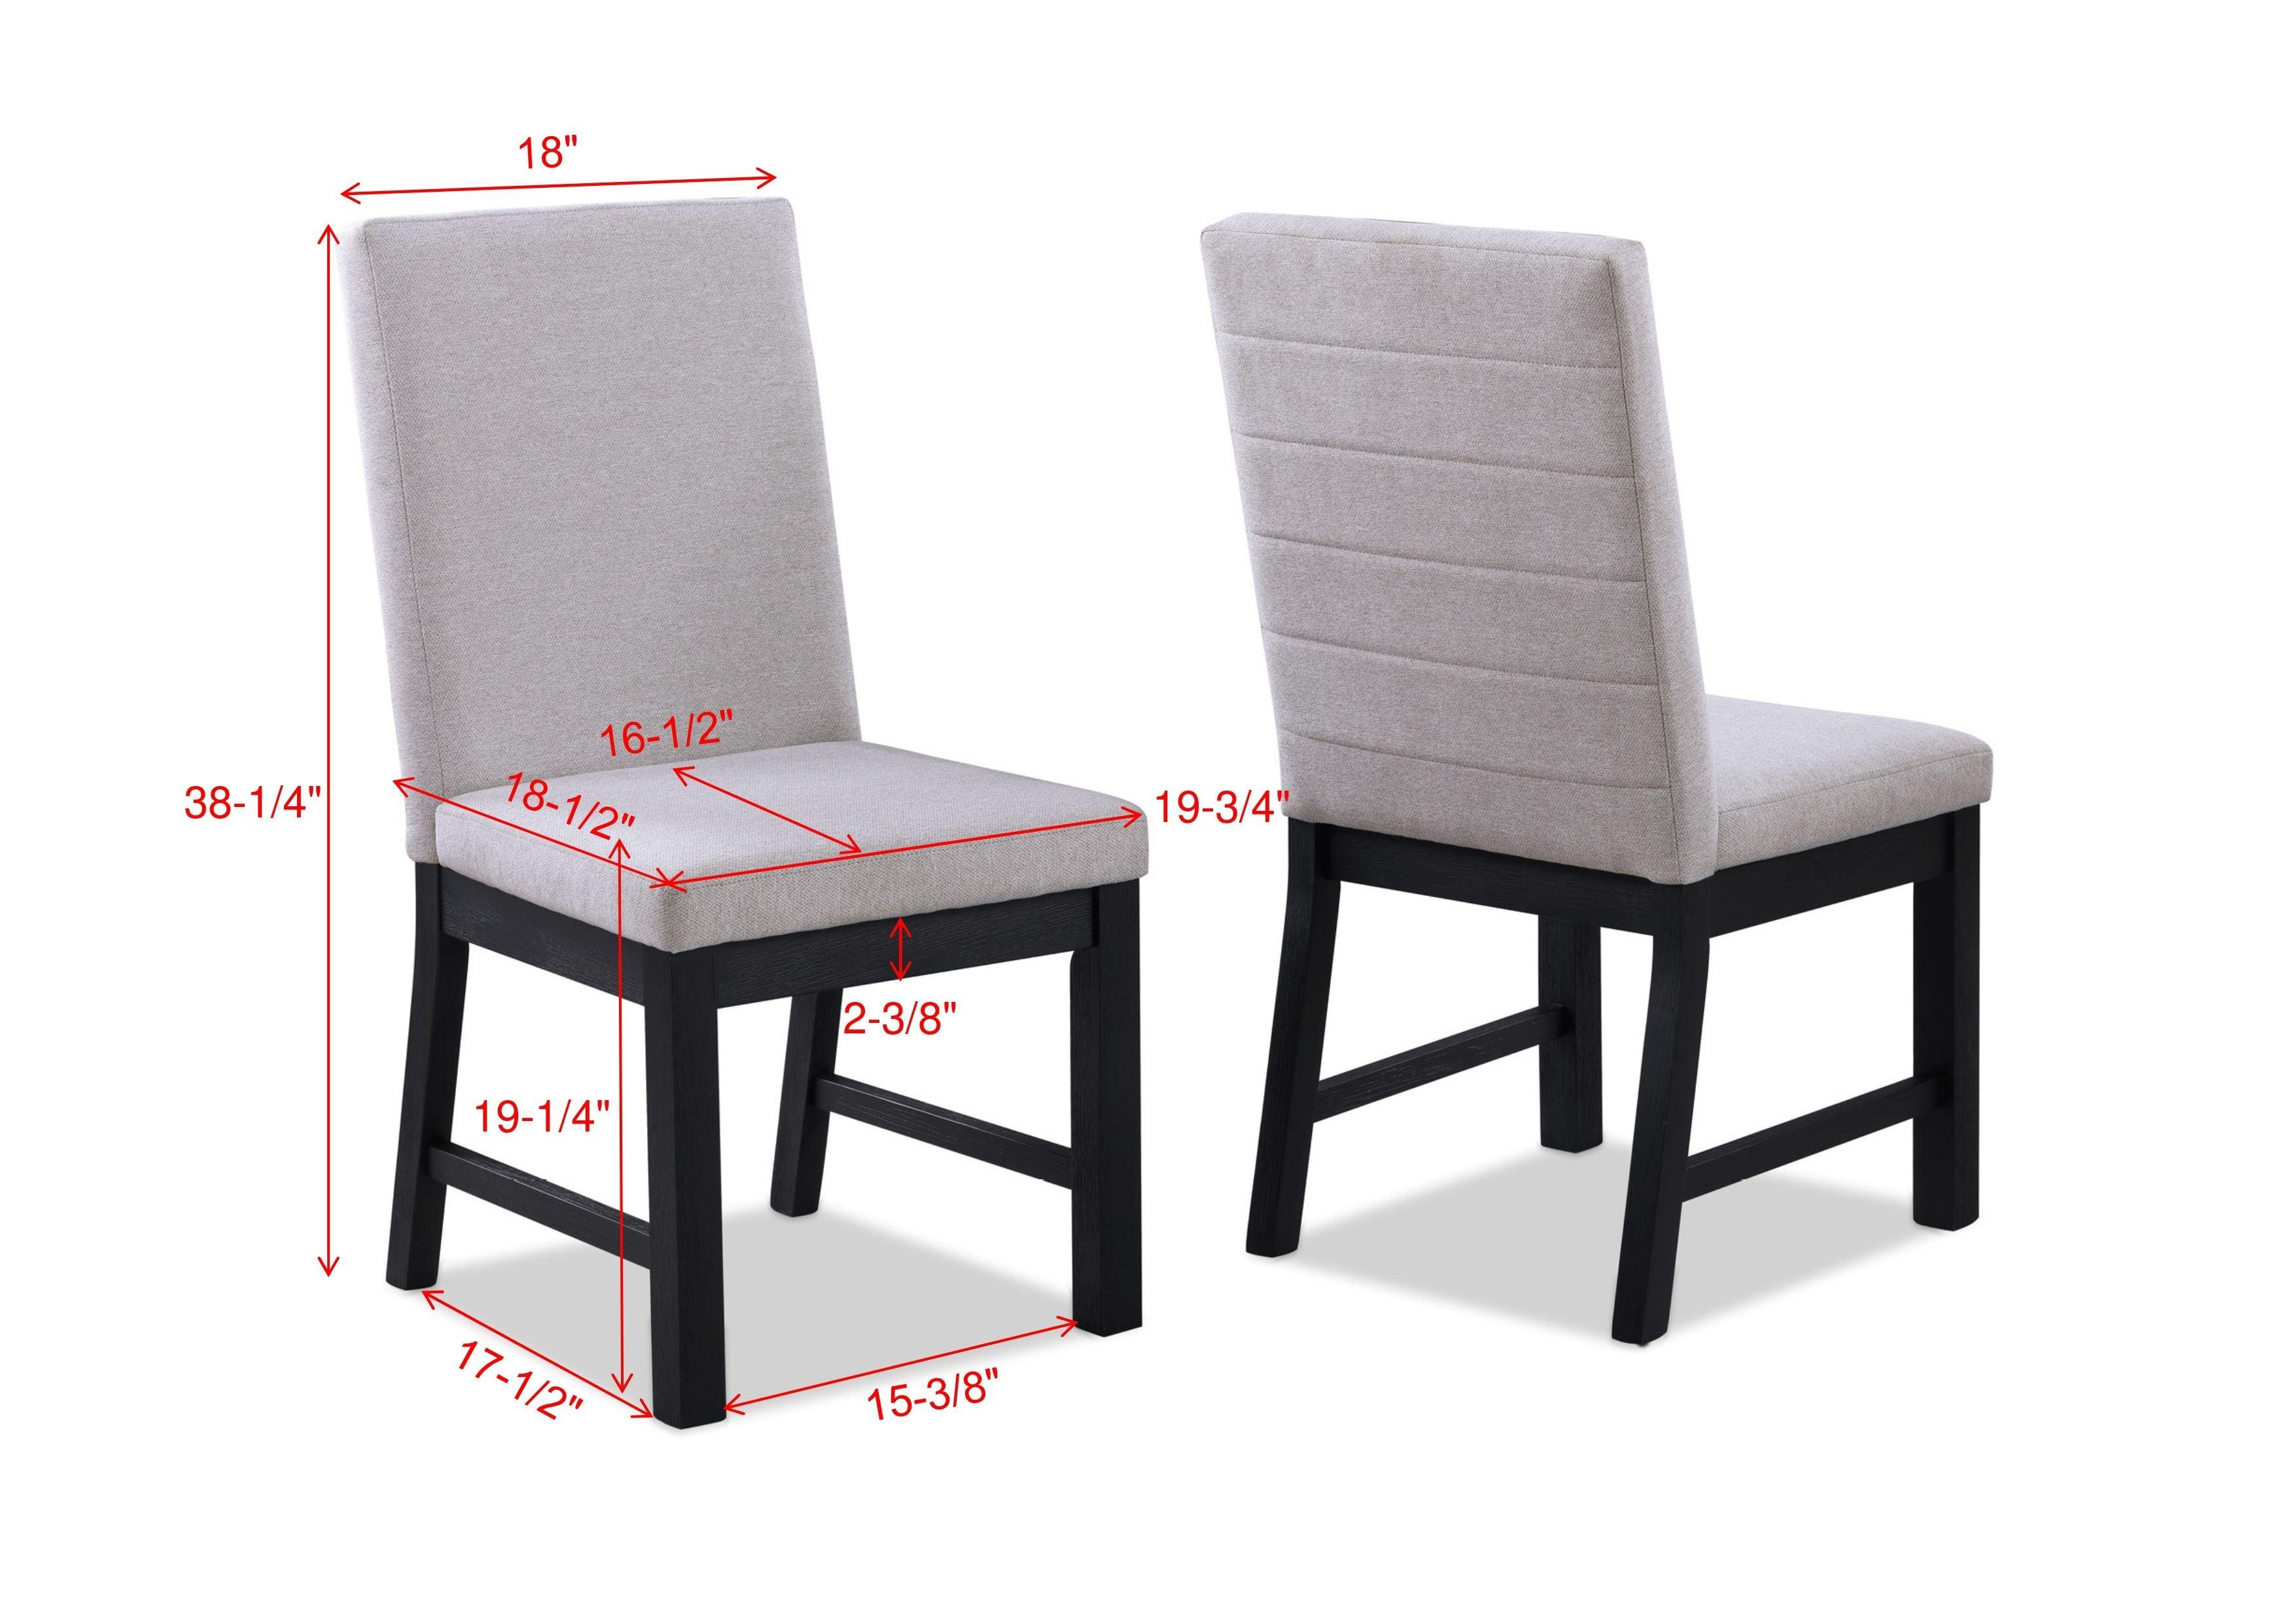 Crown Mark - Pelham - Dining Chair (Set of 2) - Charcoal & Gray - 5th Avenue Furniture